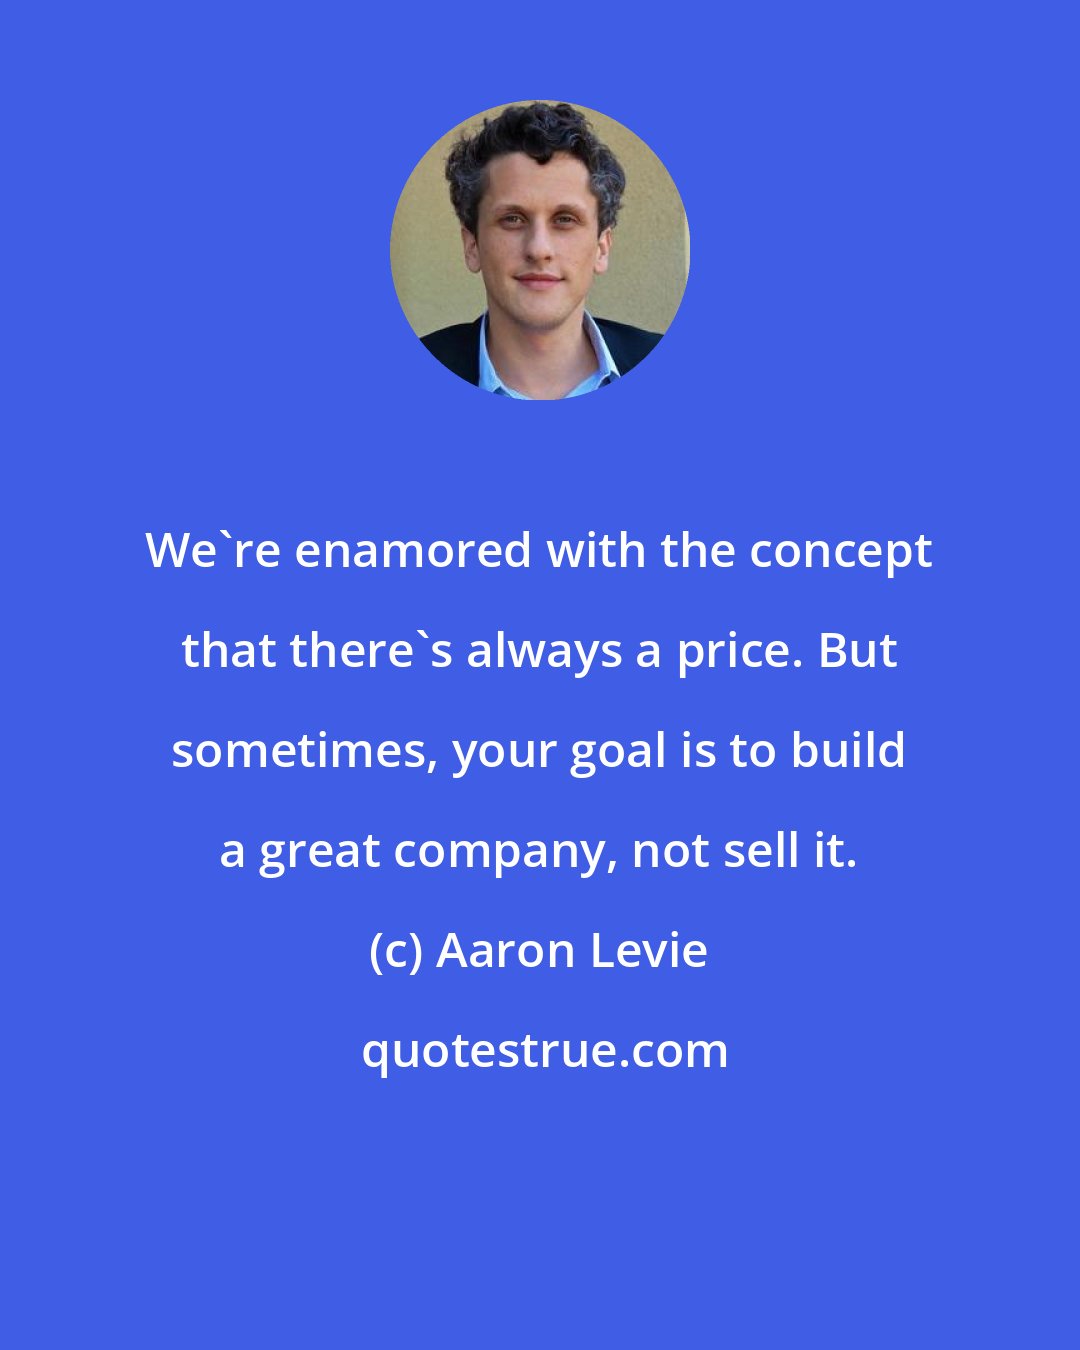 Aaron Levie: We're enamored with the concept that there's always a price. But sometimes, your goal is to build a great company, not sell it.